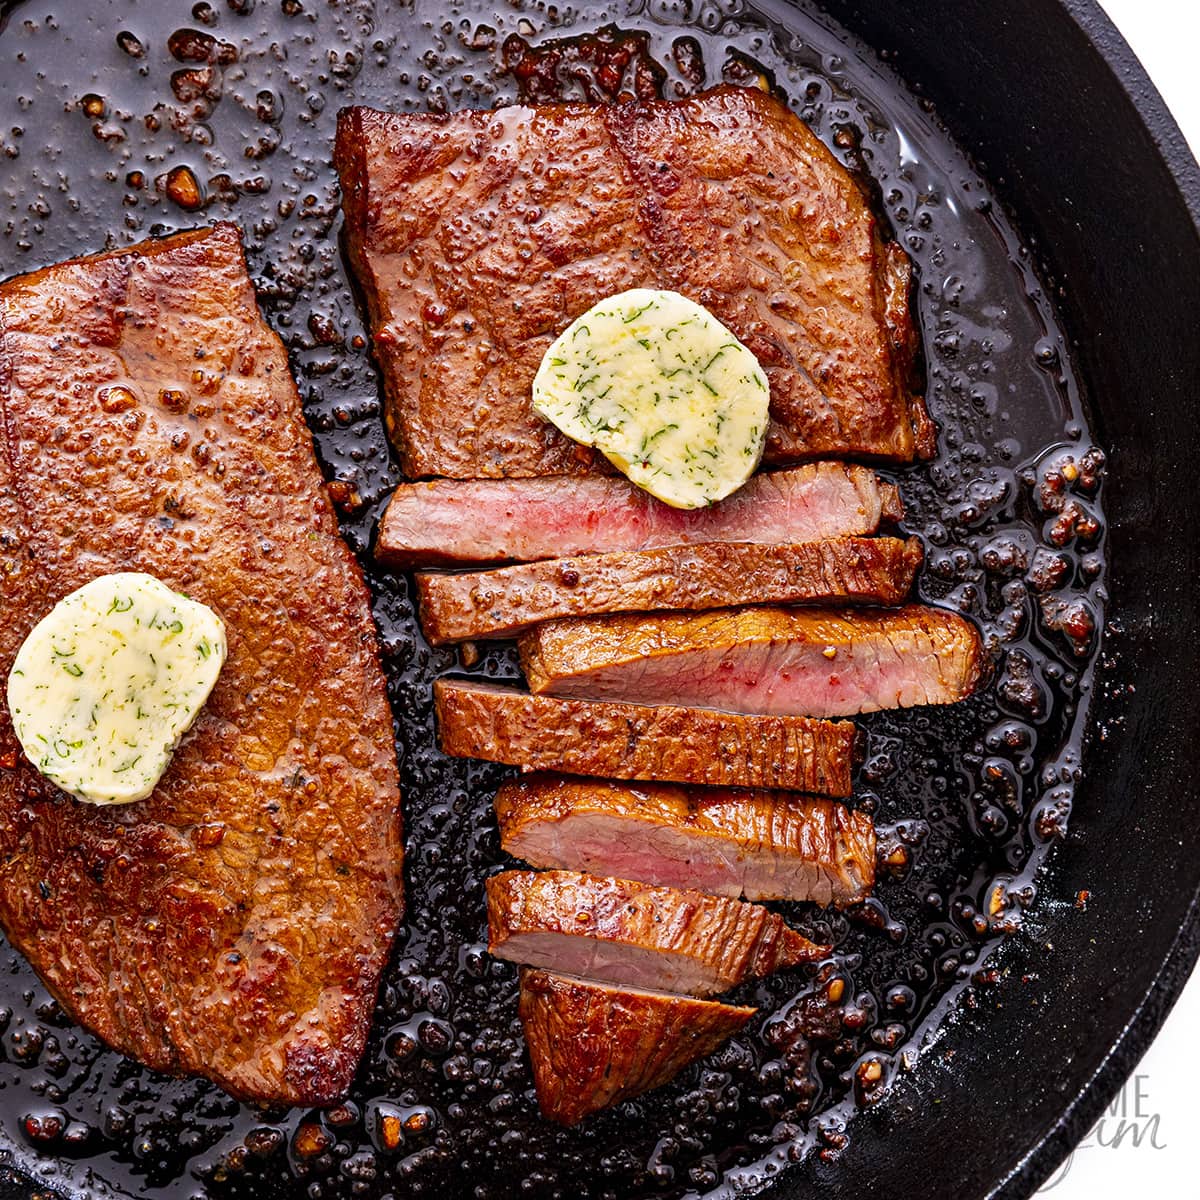 Cooked sirloin tip steak in a skillet.